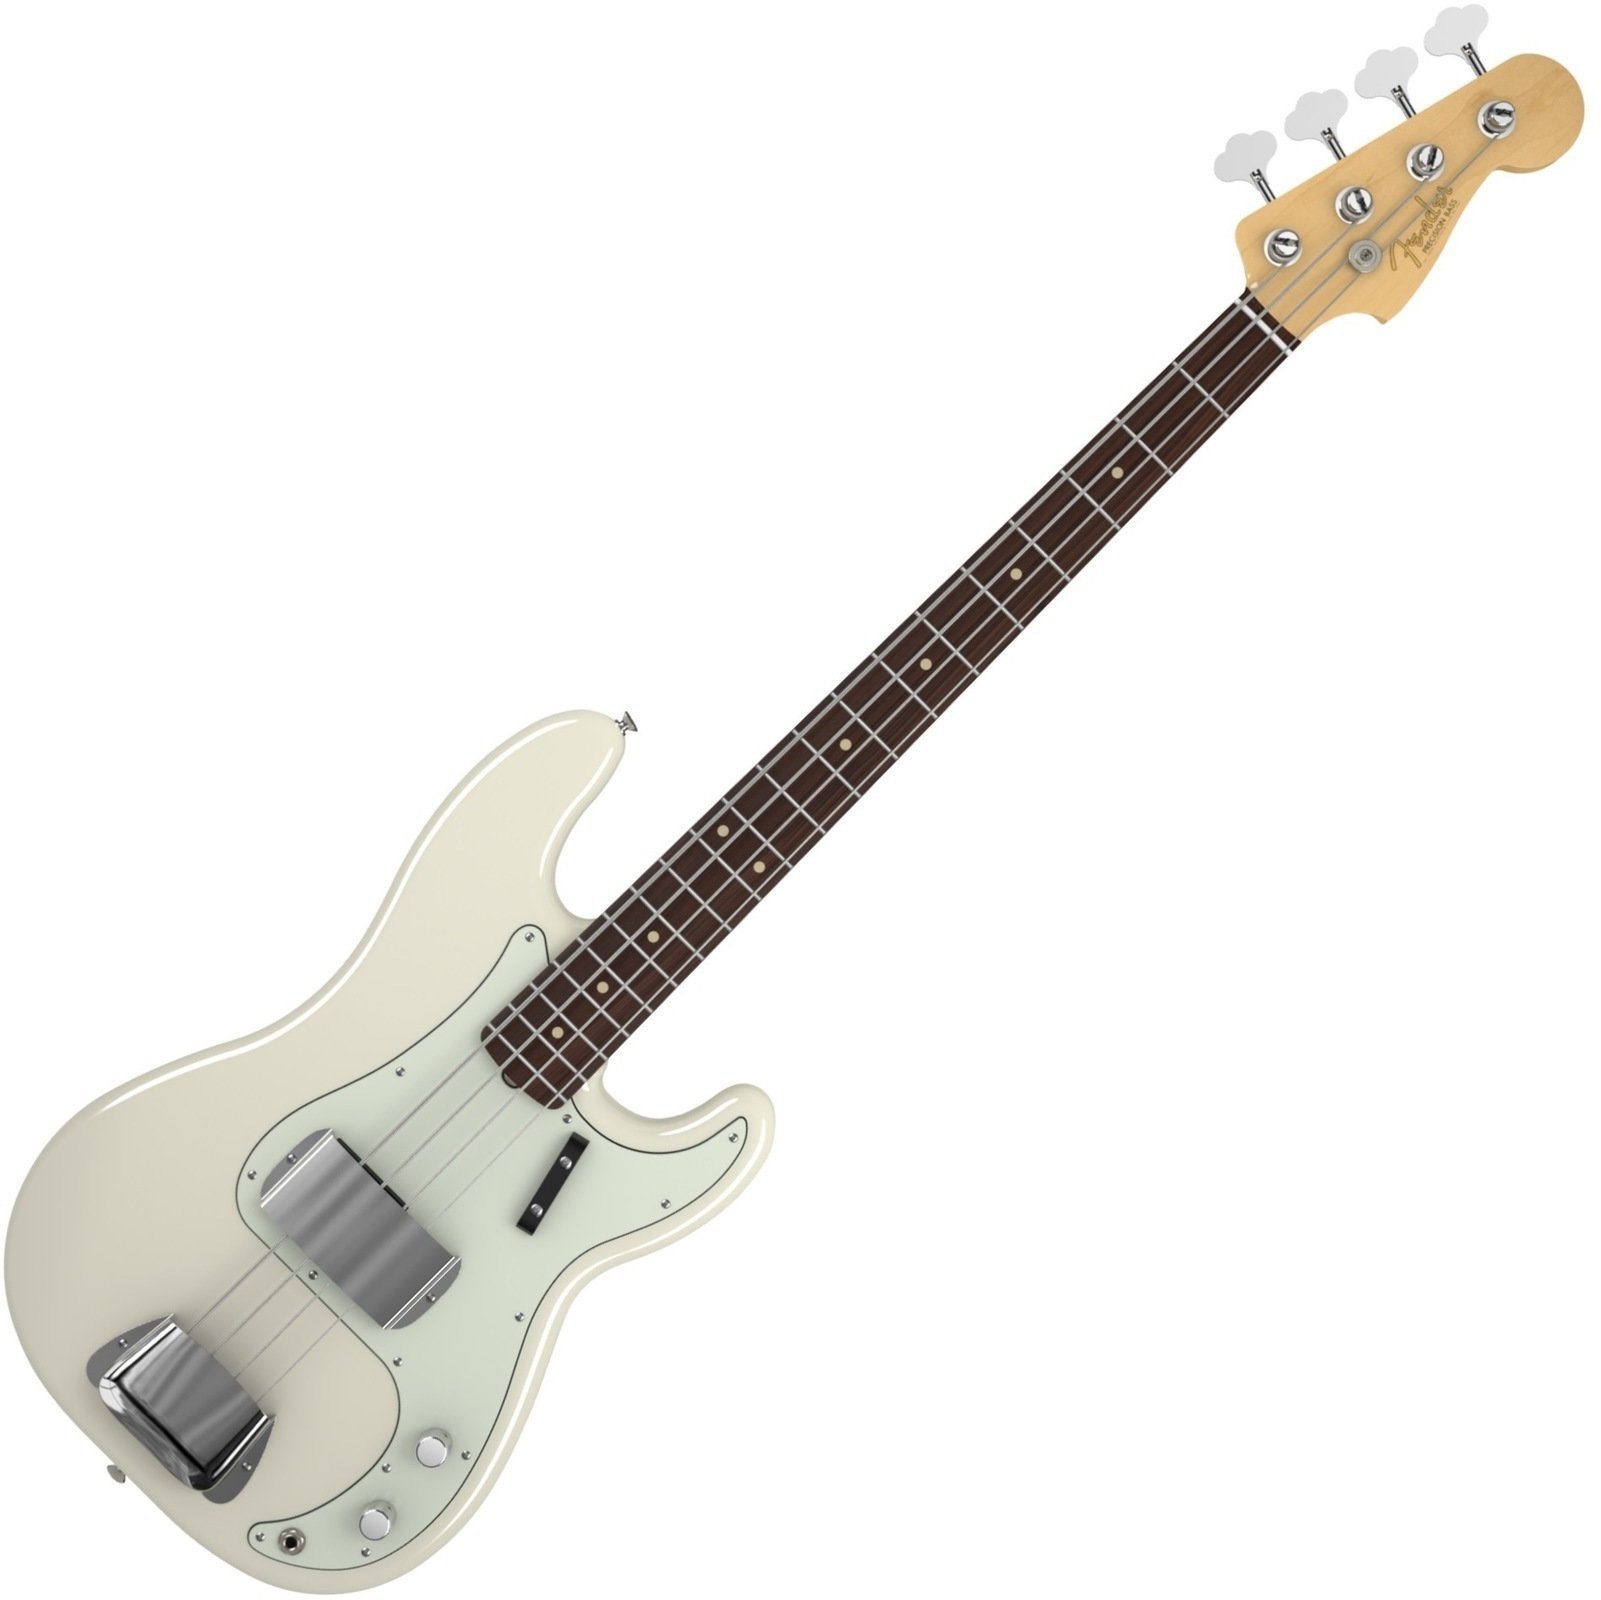 Basse électrique Fender American Vintage '63 Precision Bass, Rosewood Fingerboard, Olympic White